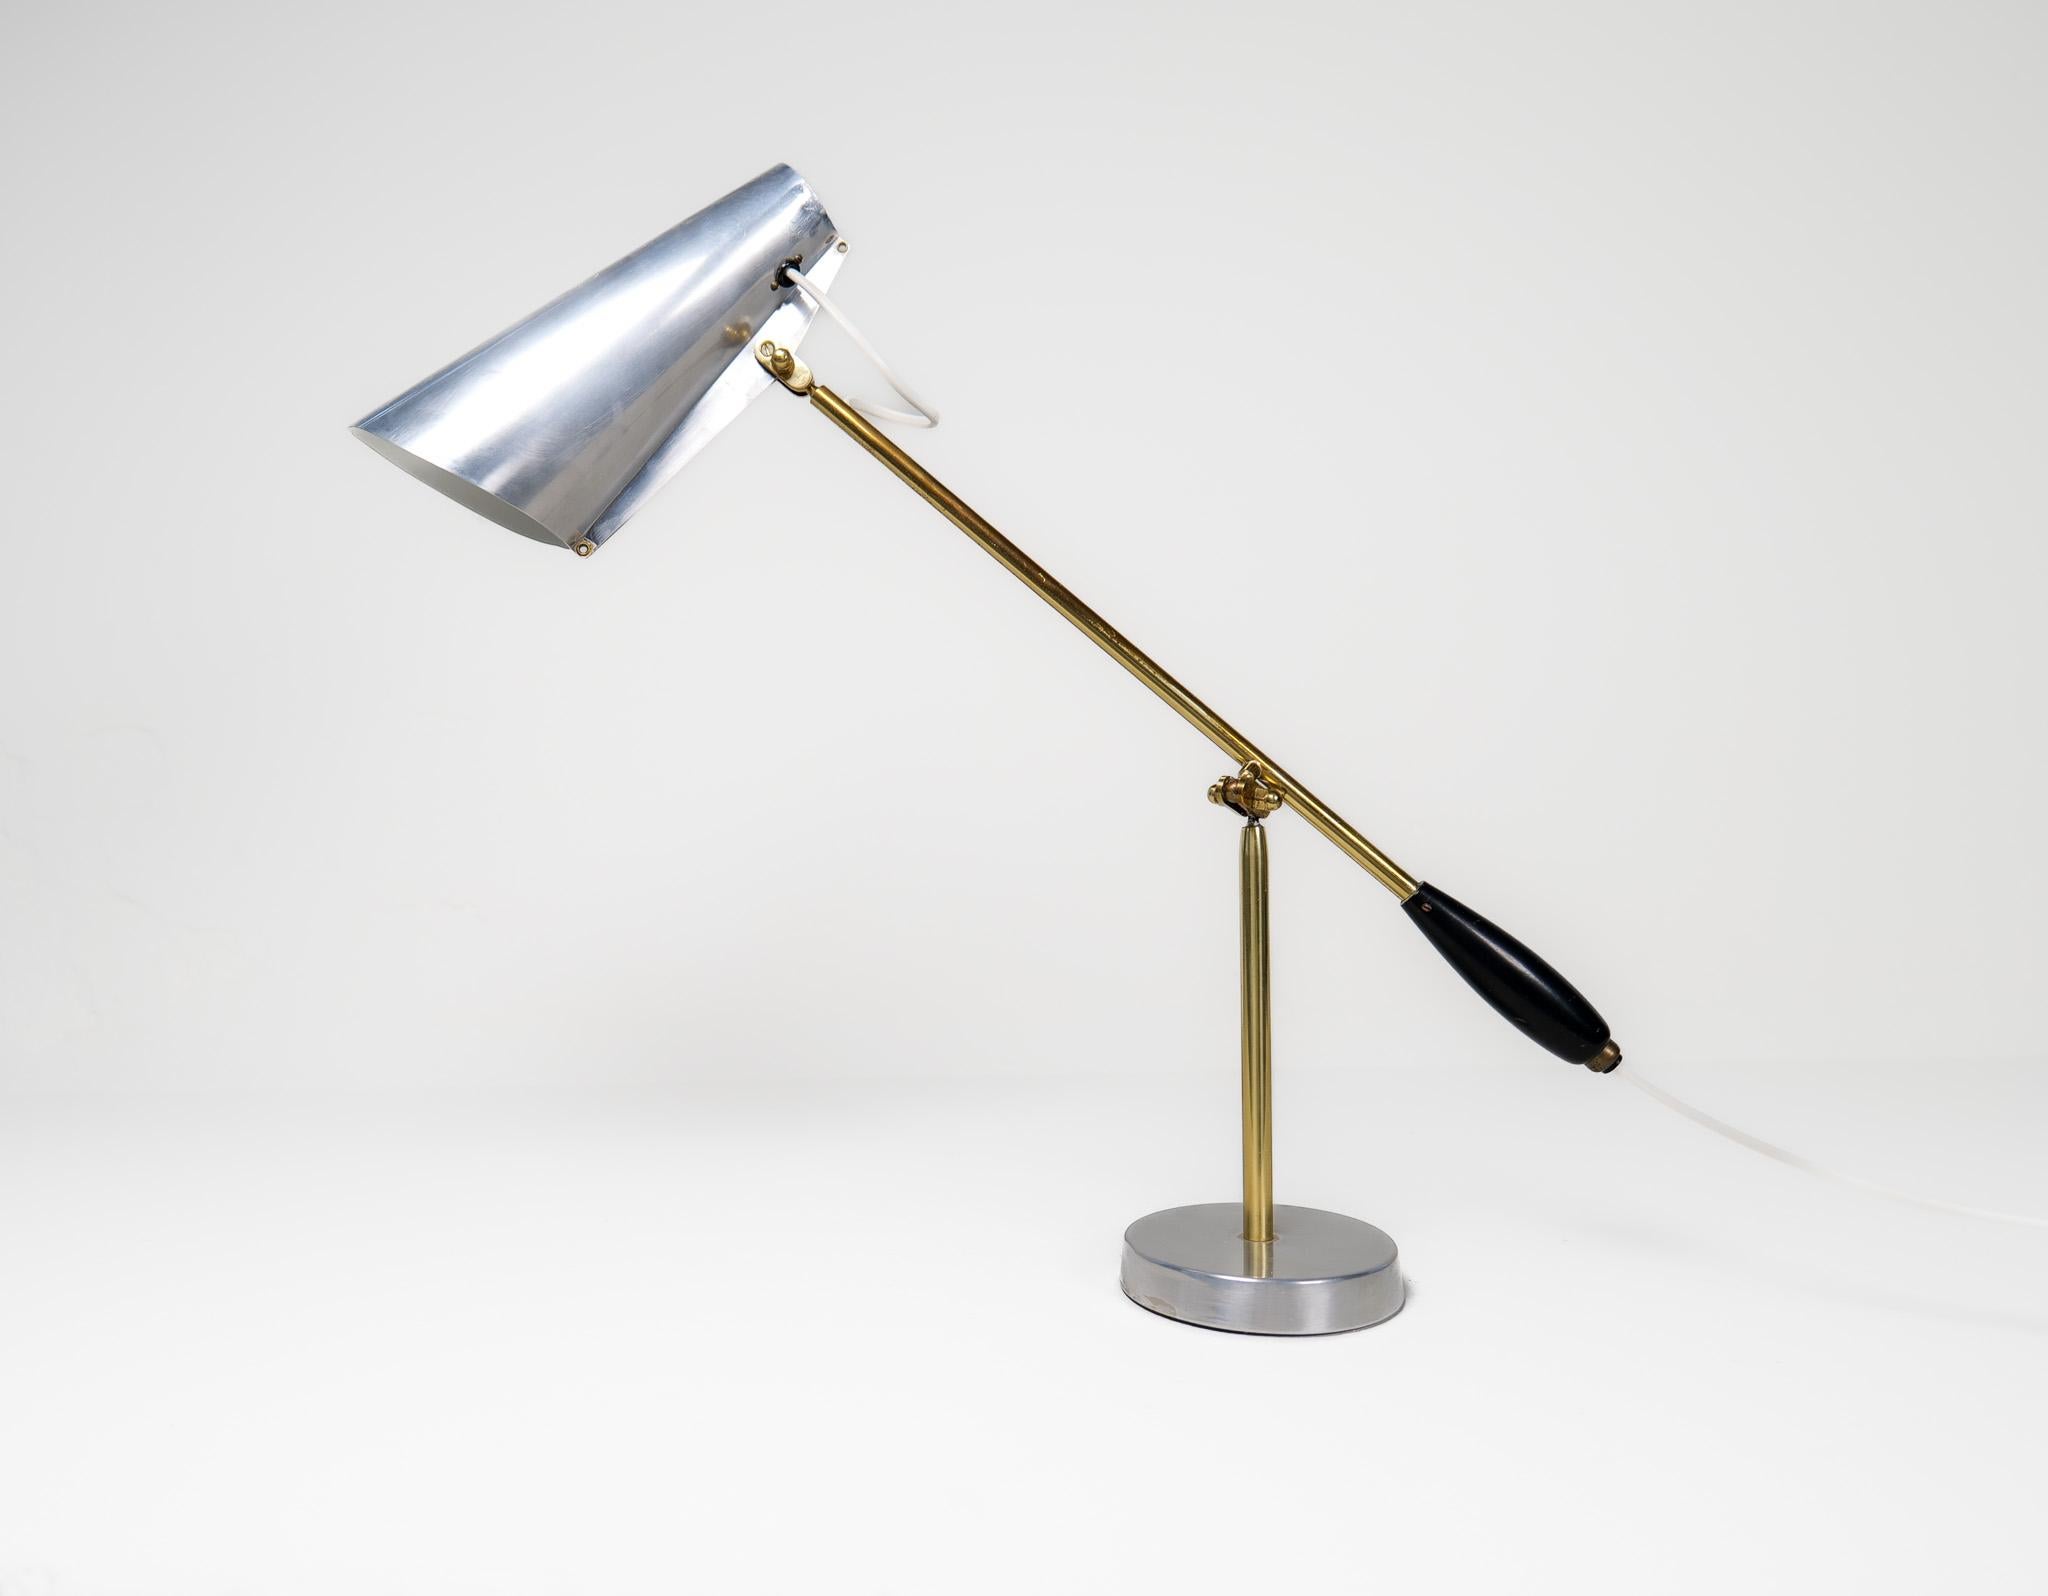 1950s Birger Dahl Modell: S-30016 table lamp for Sonnico, Norway. This architectural table lamp was designed in 1952 and made in polished metal with exquisite brass details. This lamp is a stunning piece of design.

Good vintage condition with